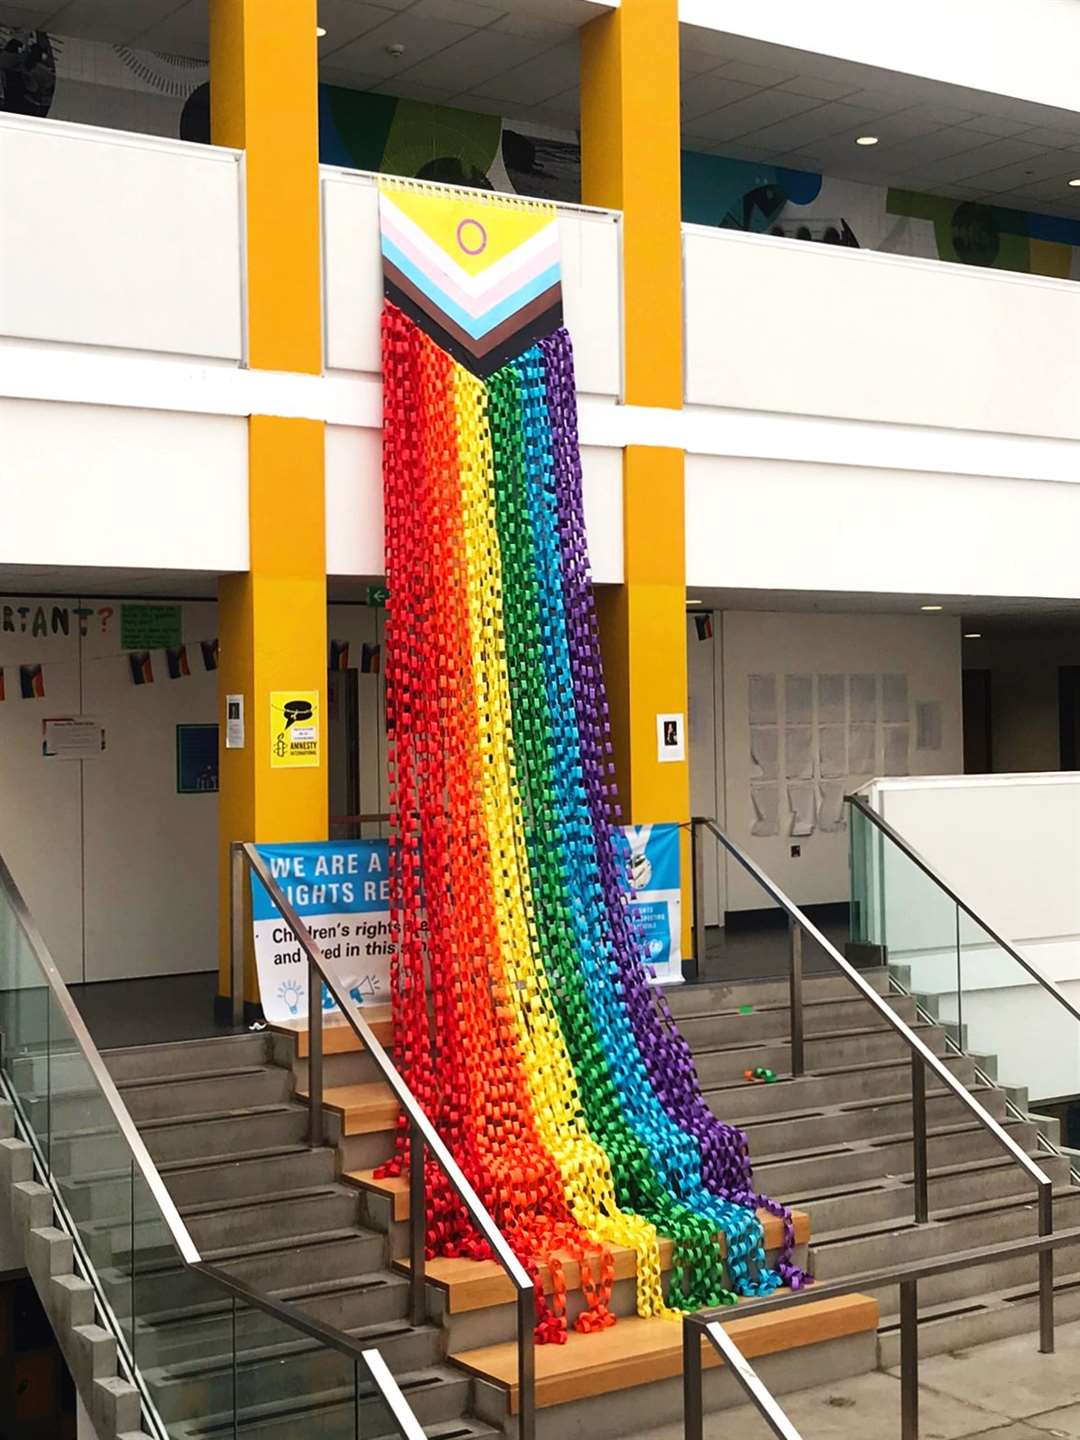 Incoming first year and senior pupils at Inverness Royal Academy have created a Pride month art installation featuring hopes, fears and advice for new pupils. Picture: Inverness Royal Academy Facebook